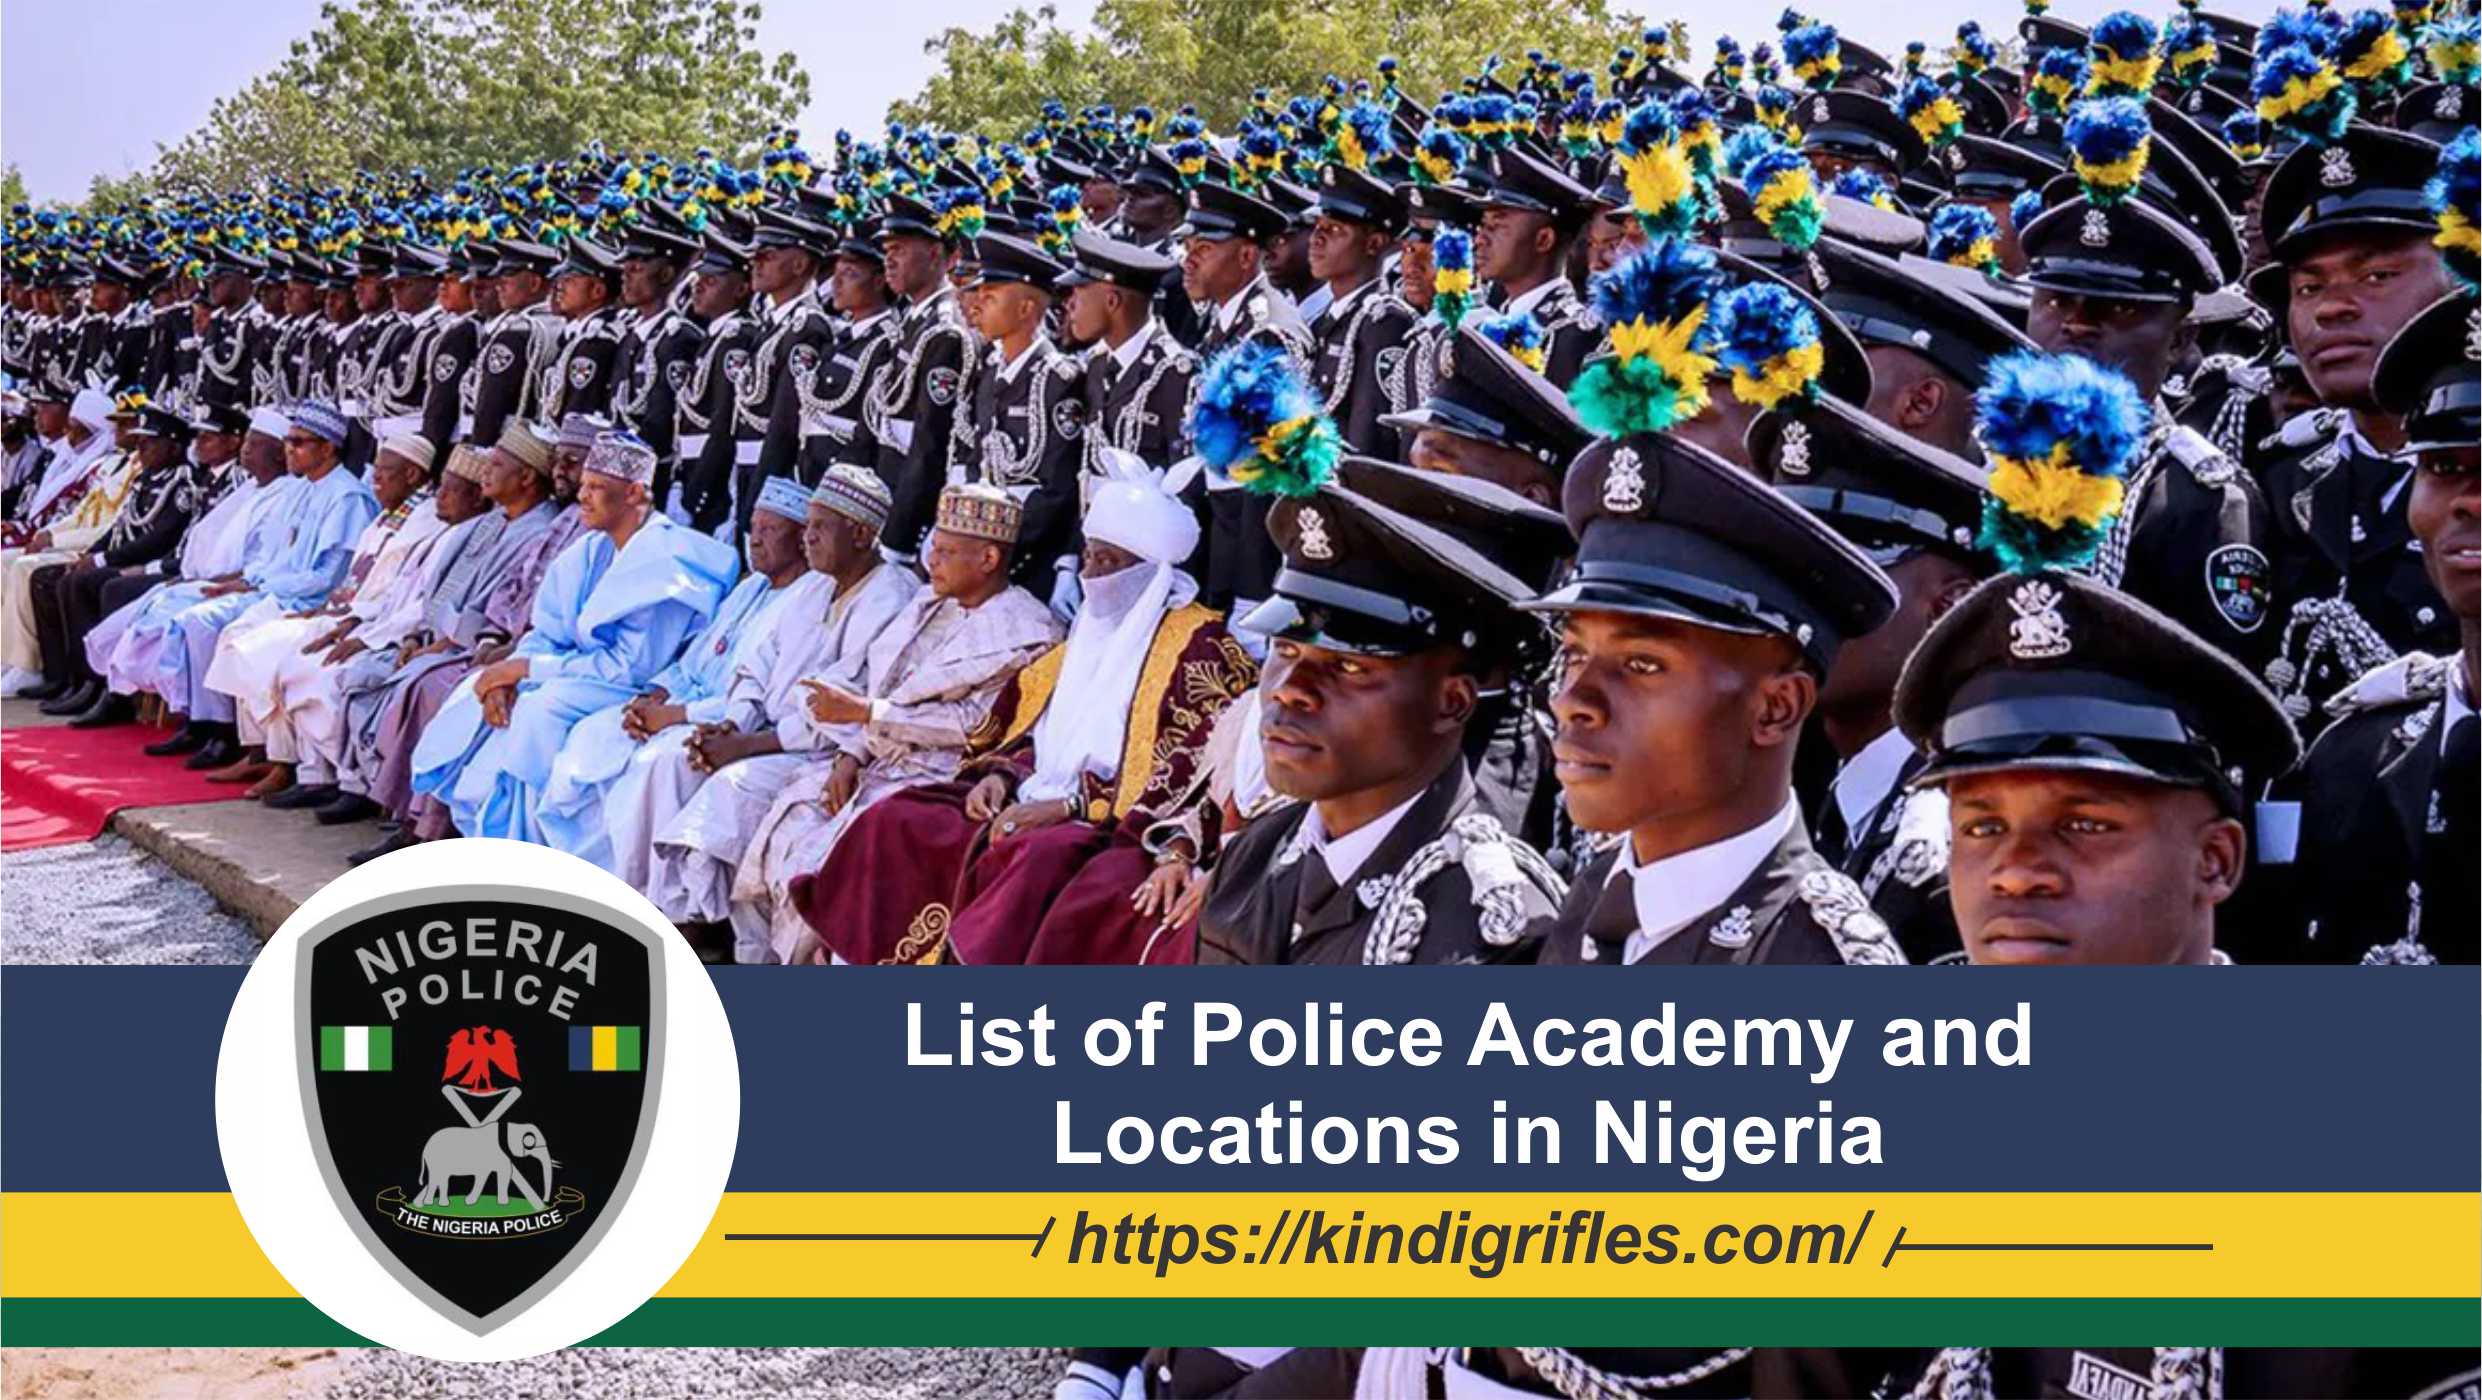 List of Police Academy and Locations in Nigeria